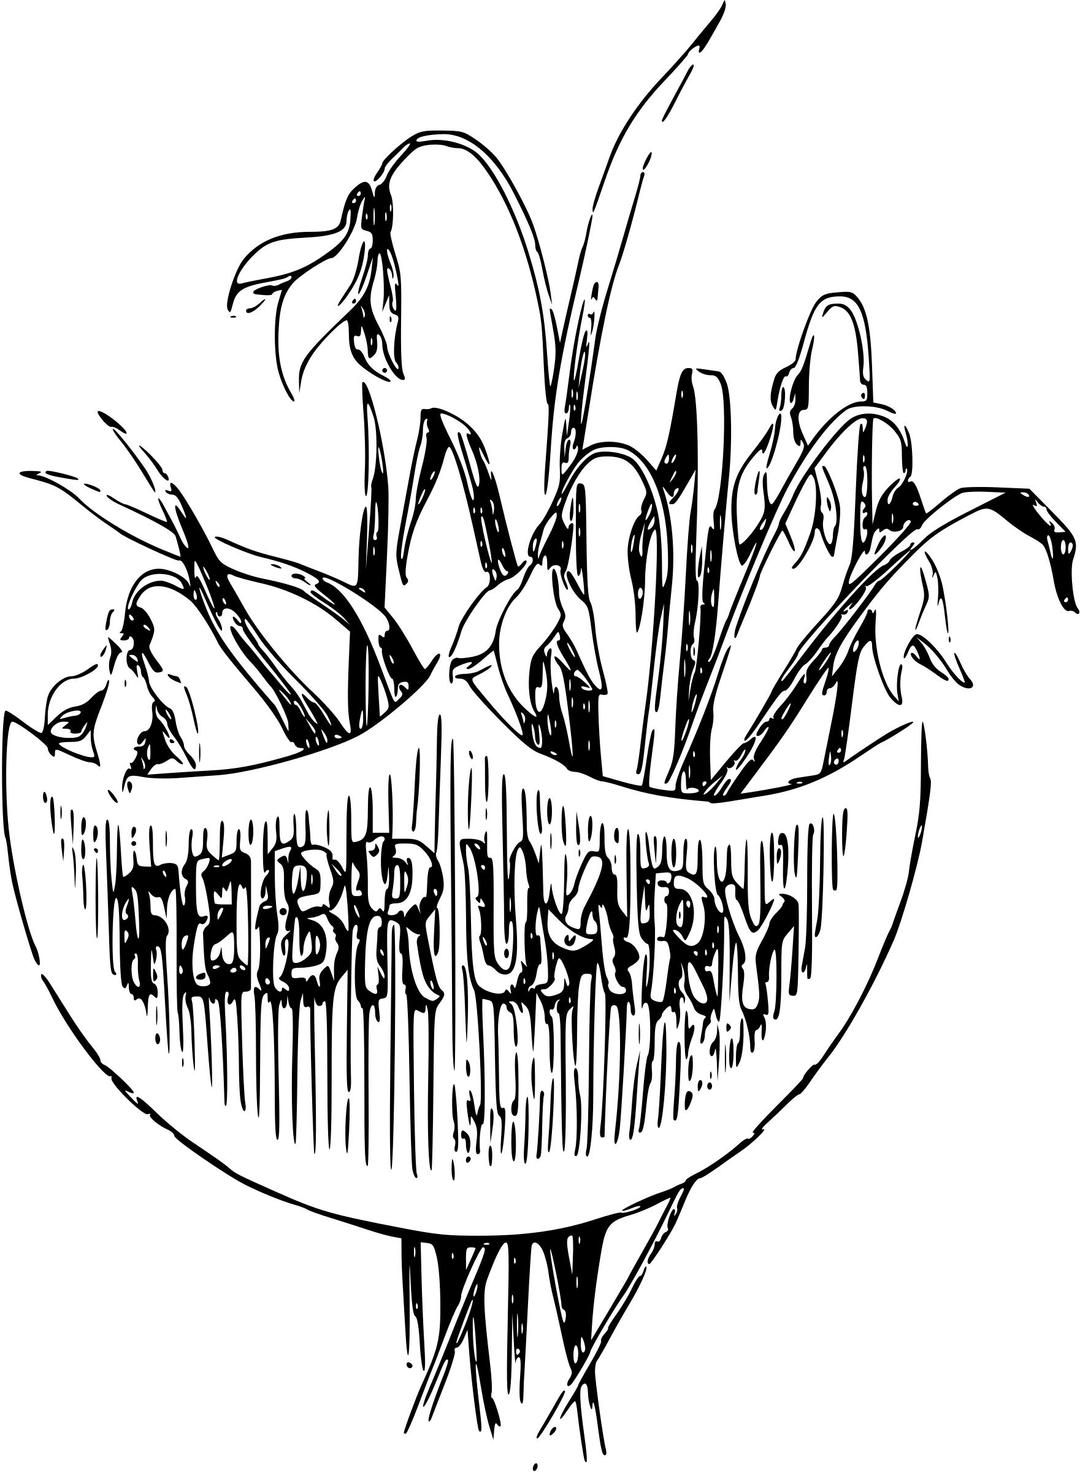 Illustrated months (February) png transparent